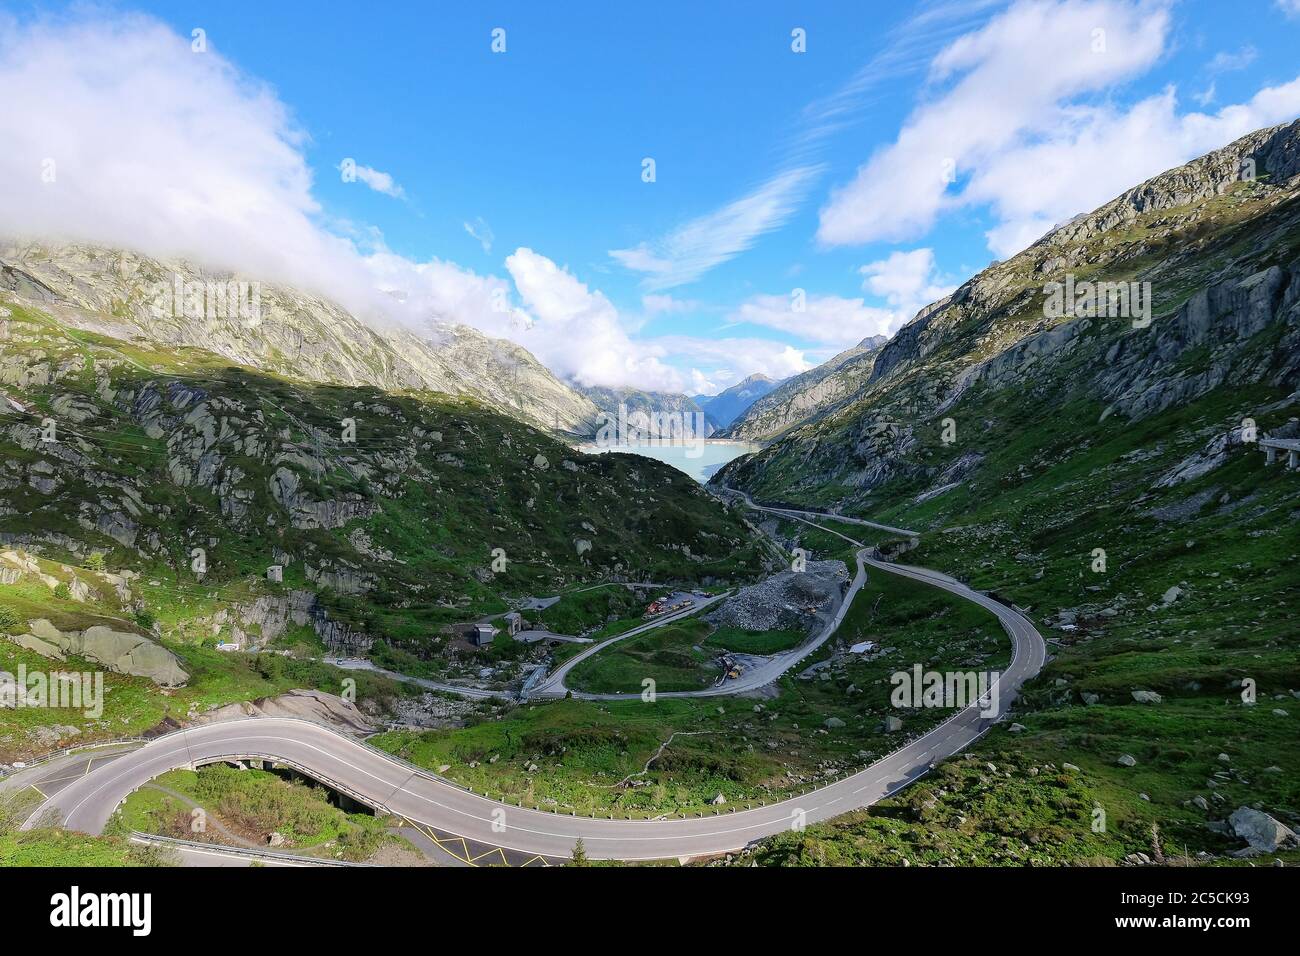 Räterichsbodensee reservoir on the Grimsel Pass in the Swiss Alps, connecting the Bernese Oberland with the Upper Valais, Switzerland. Stock Photo